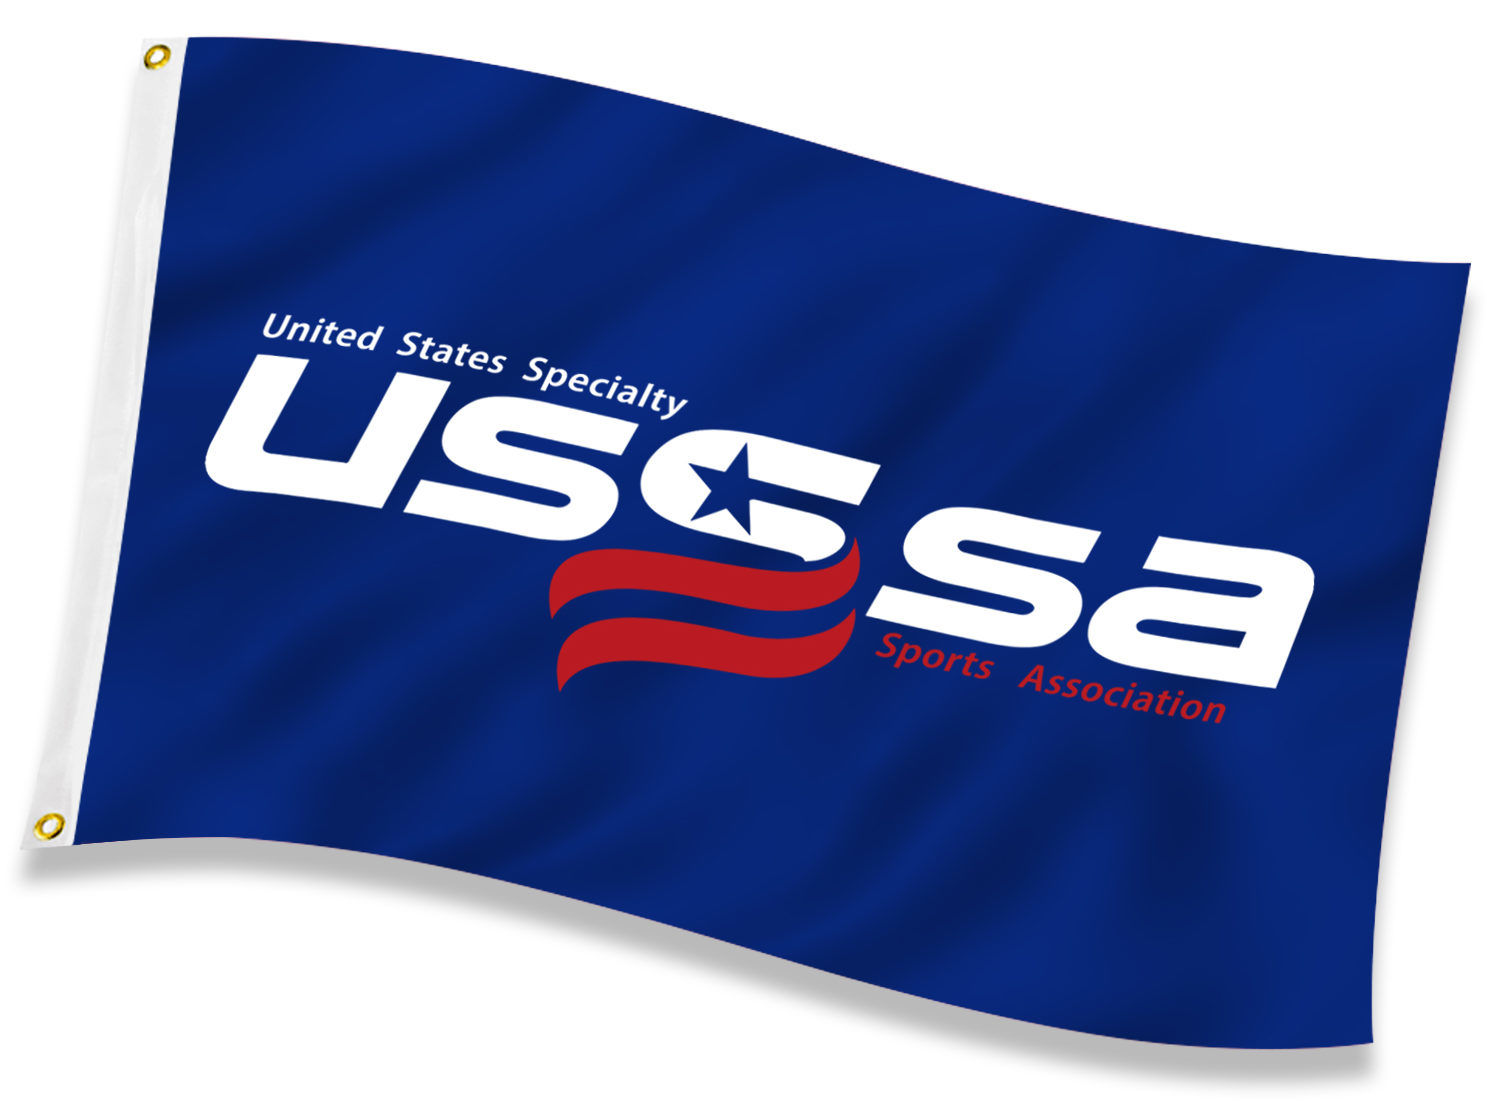 100D Polyester with Brass Grommets 2 X 3 Ft Vivid Color ANLEY Custom Flag 2x3 Foot Customized Flags Banners Canvas Header and Double Stitched Print Your Own Logo/Design/Words 